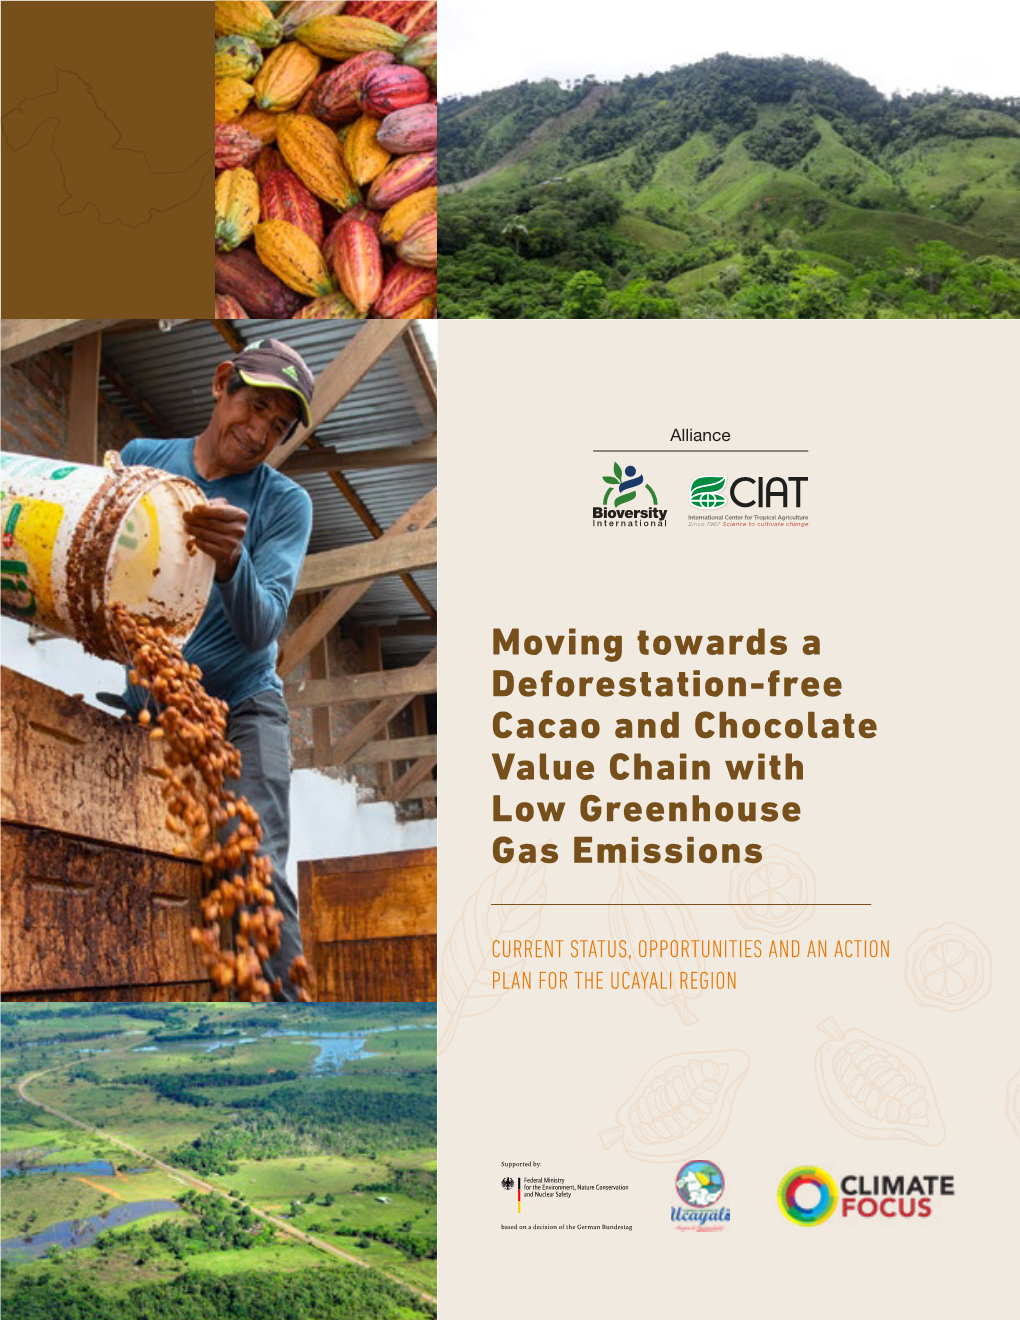 Moving Towards a Deforestation-Free Cacao and Chocolate Value Chain with Low Greenhouse Gas Emissions